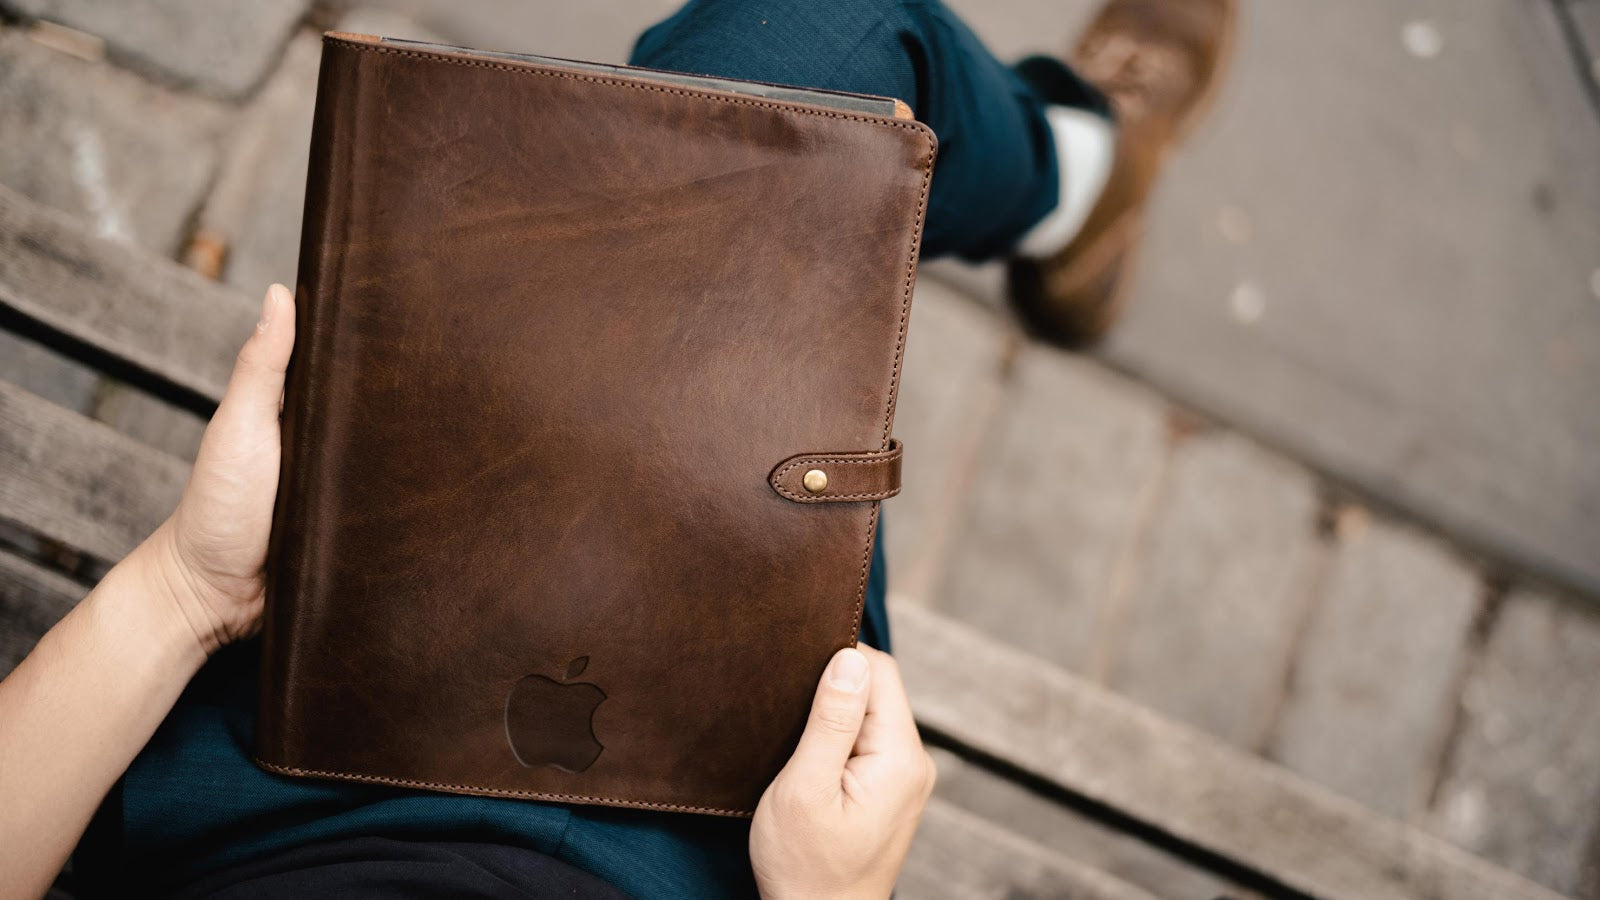 Handcrafted Corporate Leather Gifts - Maxwell-Scott